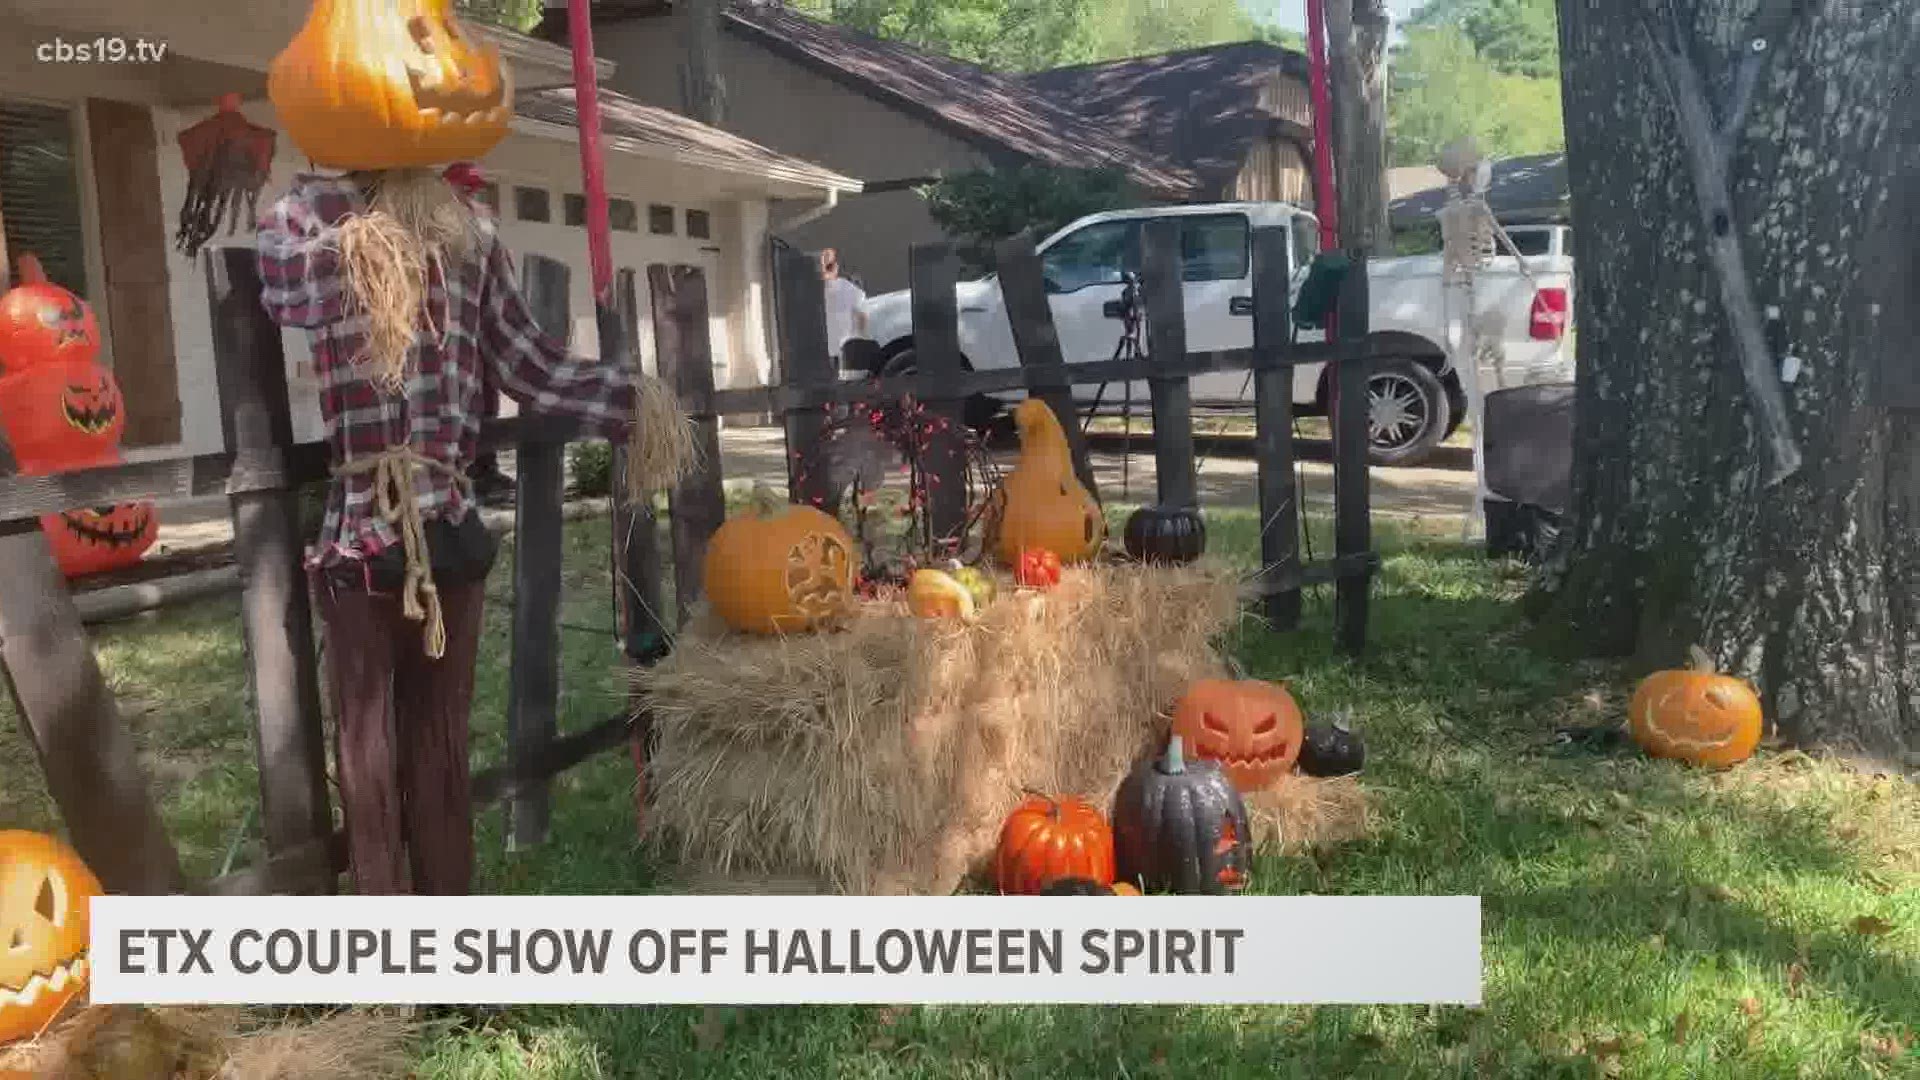 Every October, Nicole and Tim Monaghan transform their yard into a different Halloween-themed attraction.